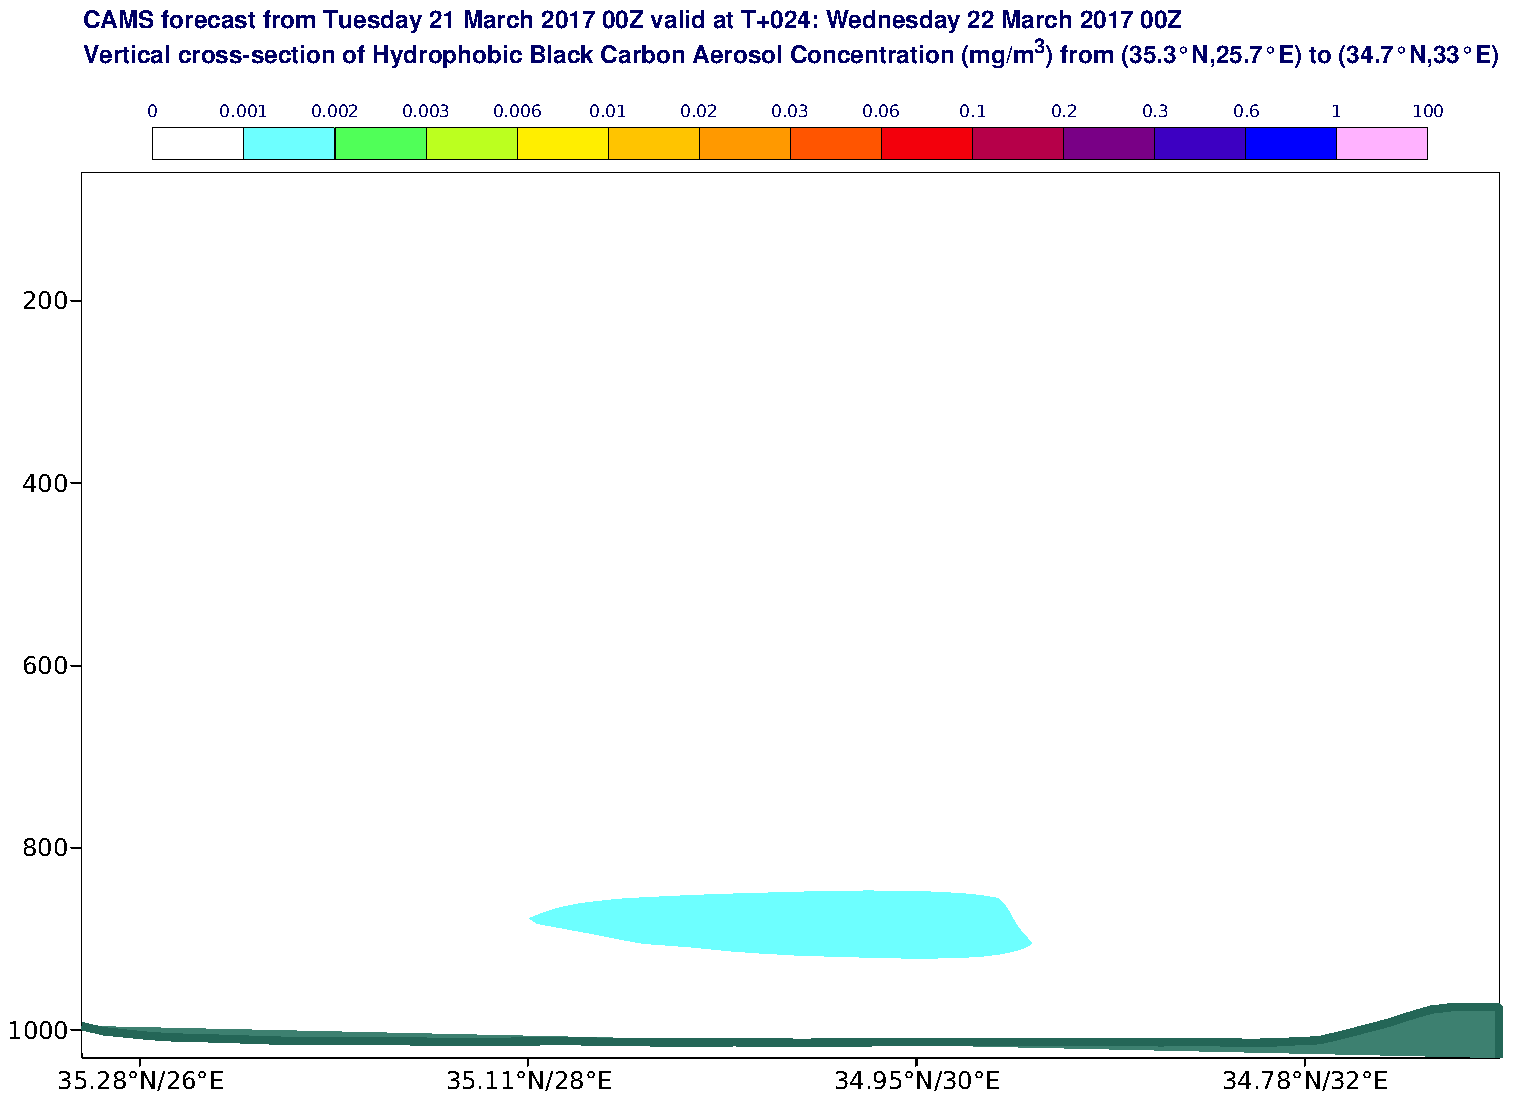 Vertical cross-section of Hydrophobic Black Carbon Aerosol Concentration (mg/m3) valid at T24 - 2017-03-22 00:00